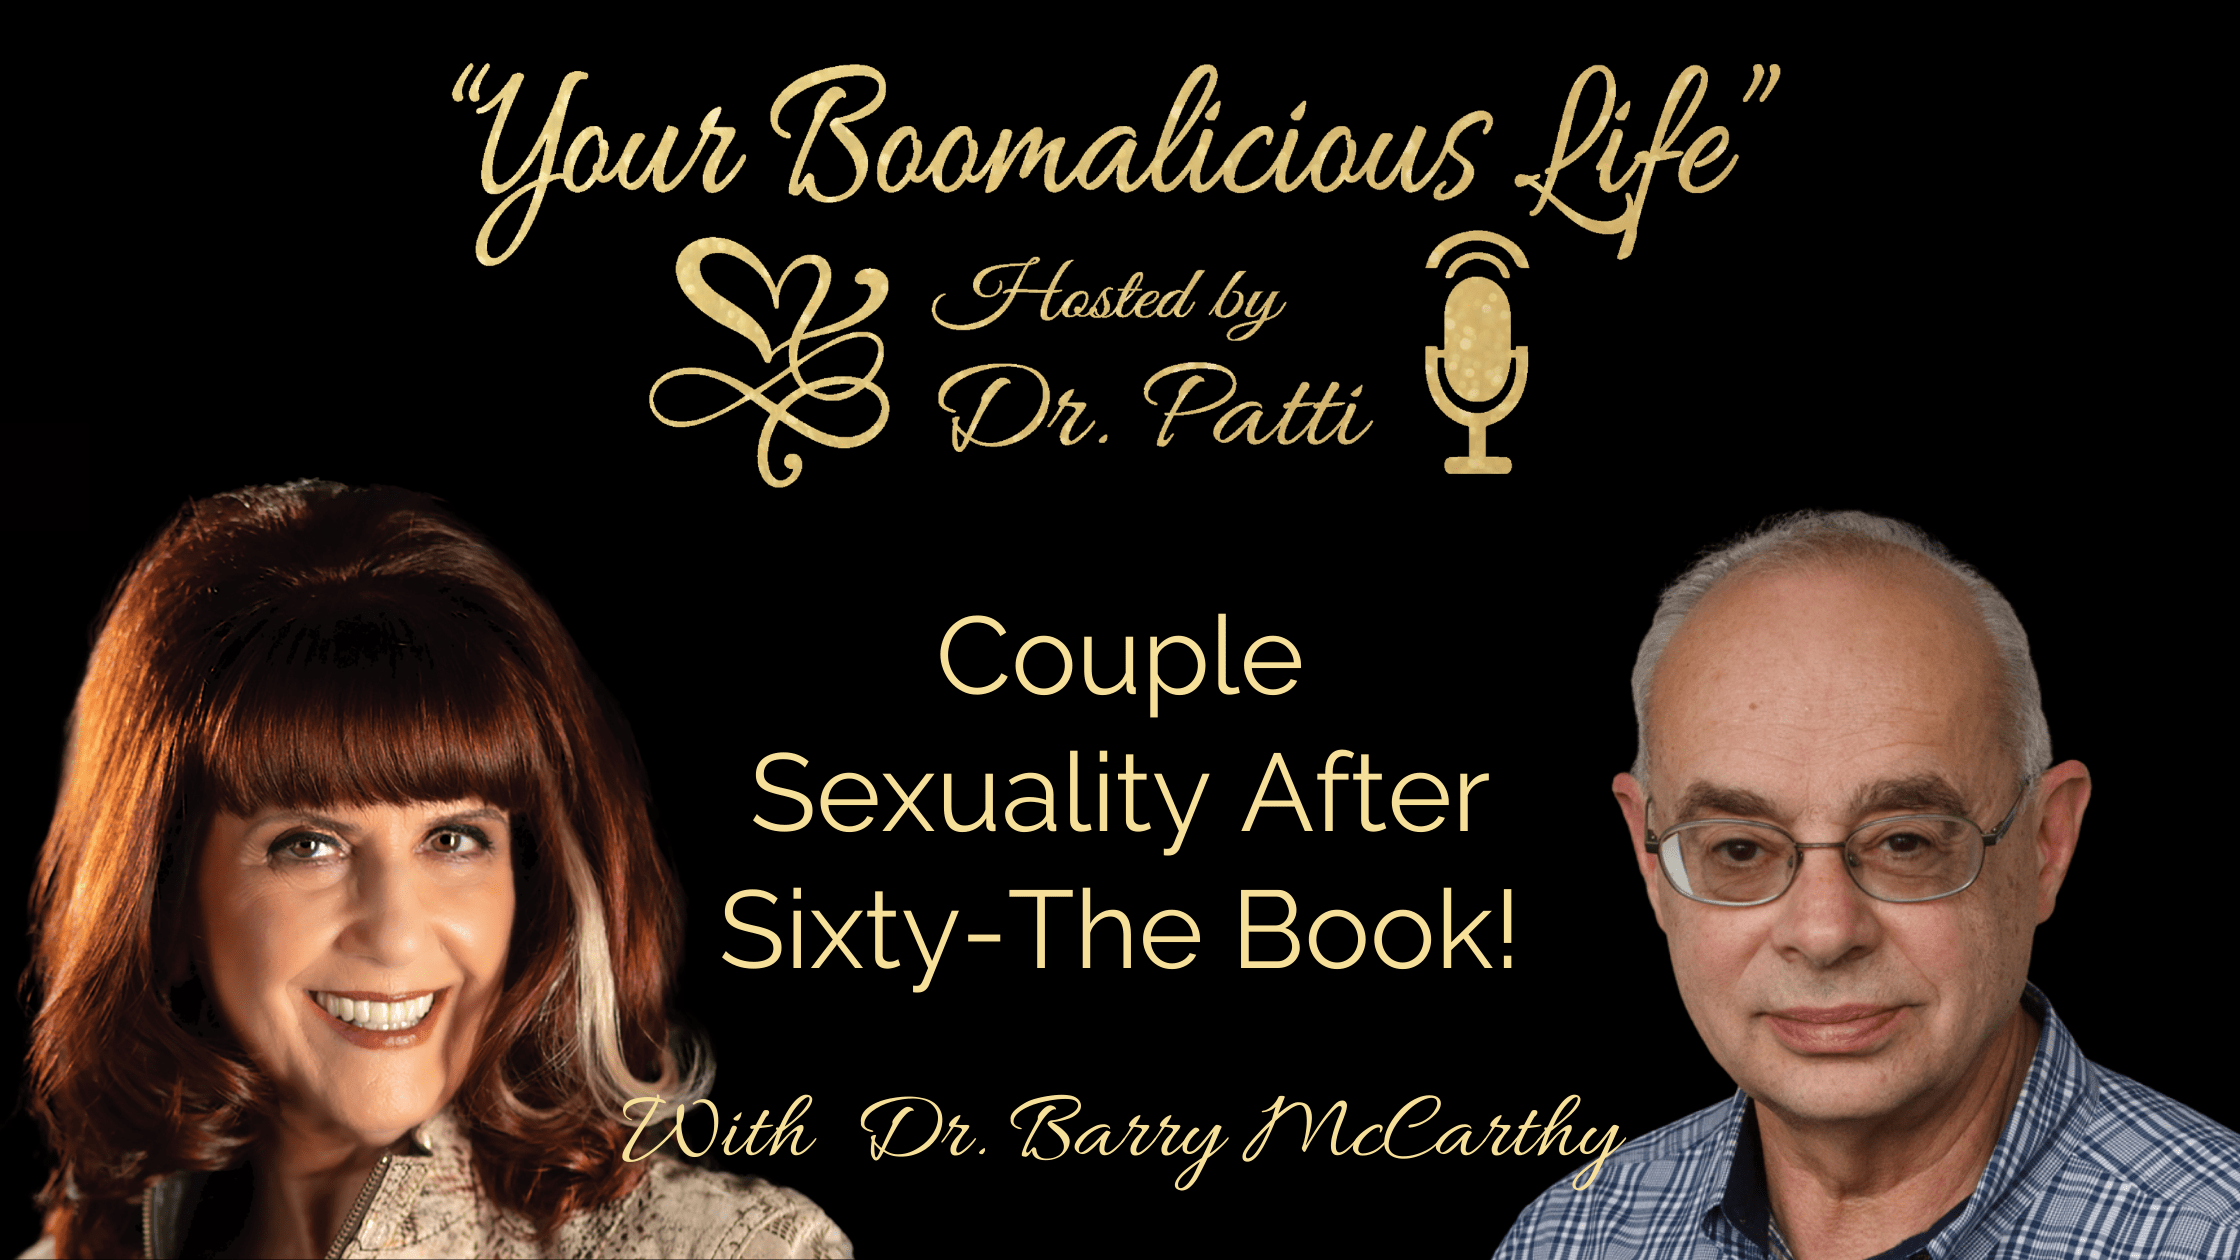 Episode 31: "Couple Sexuality After Sixty-The Book!"